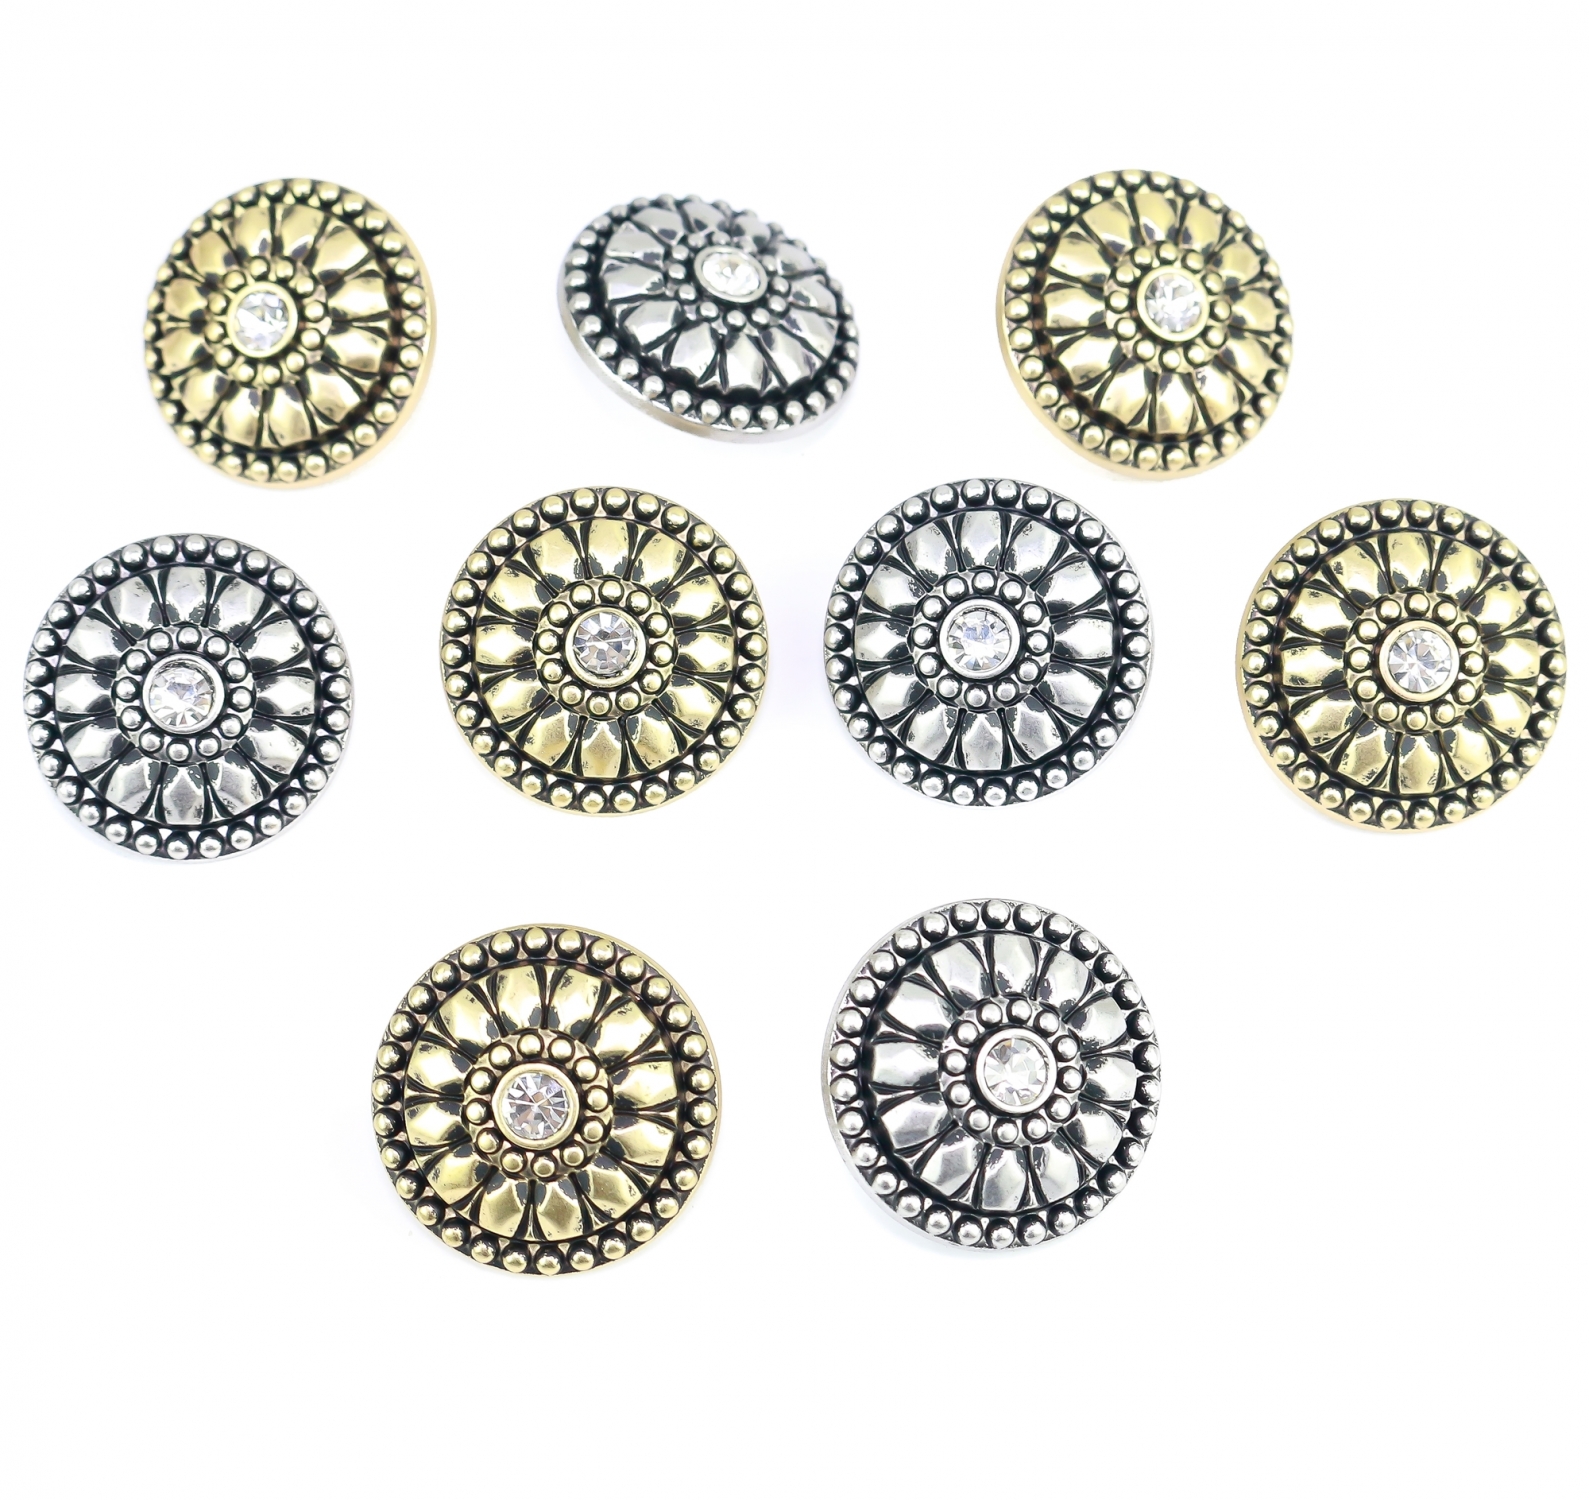 Plastic Metallized Shank Buttons, size 40 (100 pcs/pack) Code: S777